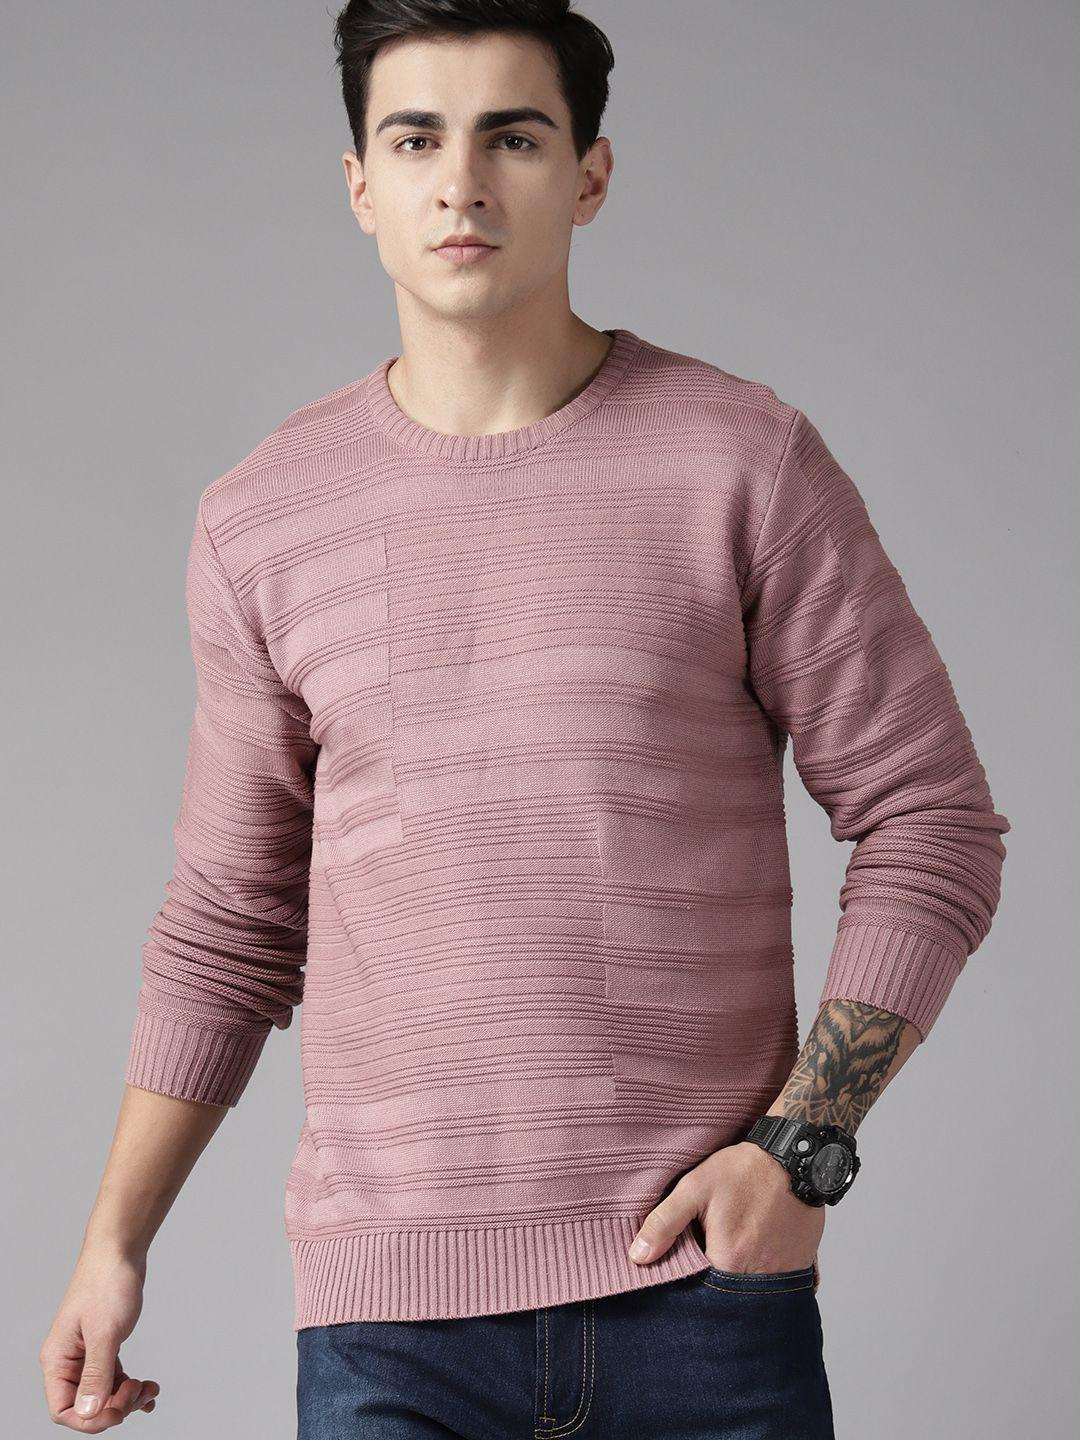 the roadster lifestyle co. acrylic cable knit pullover